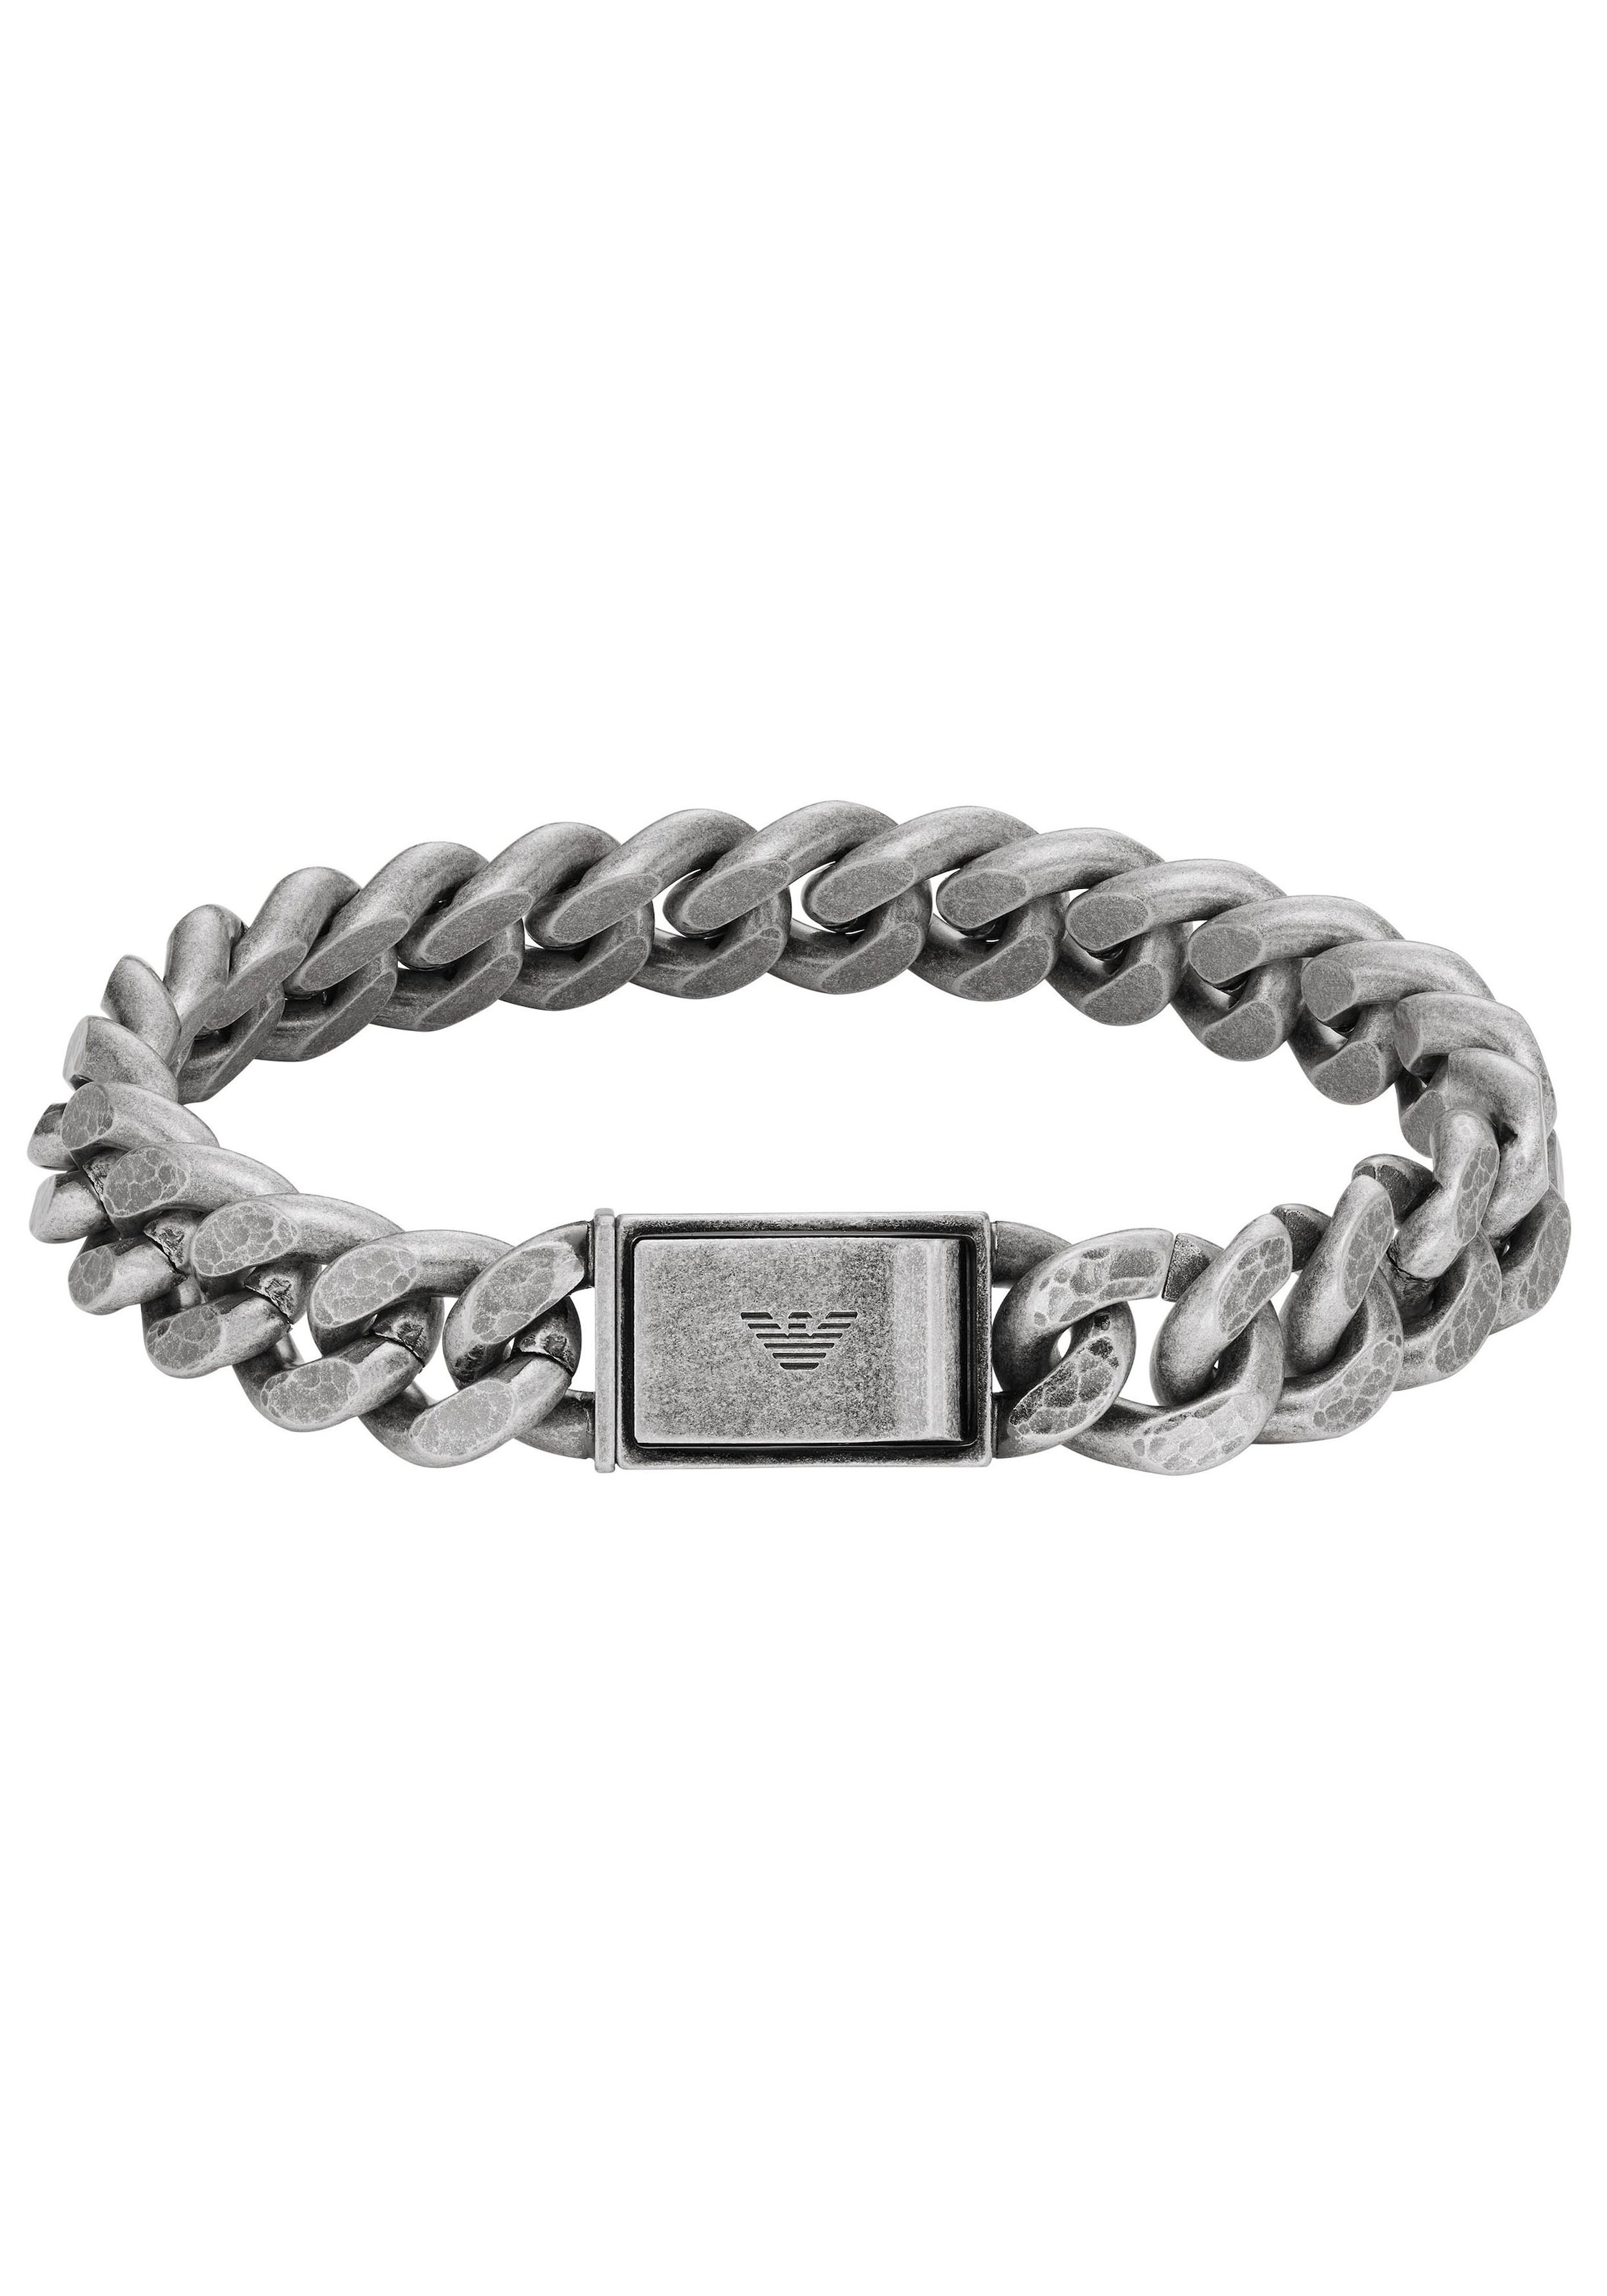 CHAINED, TREND, »ICONIC Emporio Edelstahl Armband Armani EGS3036040«, BAUR |